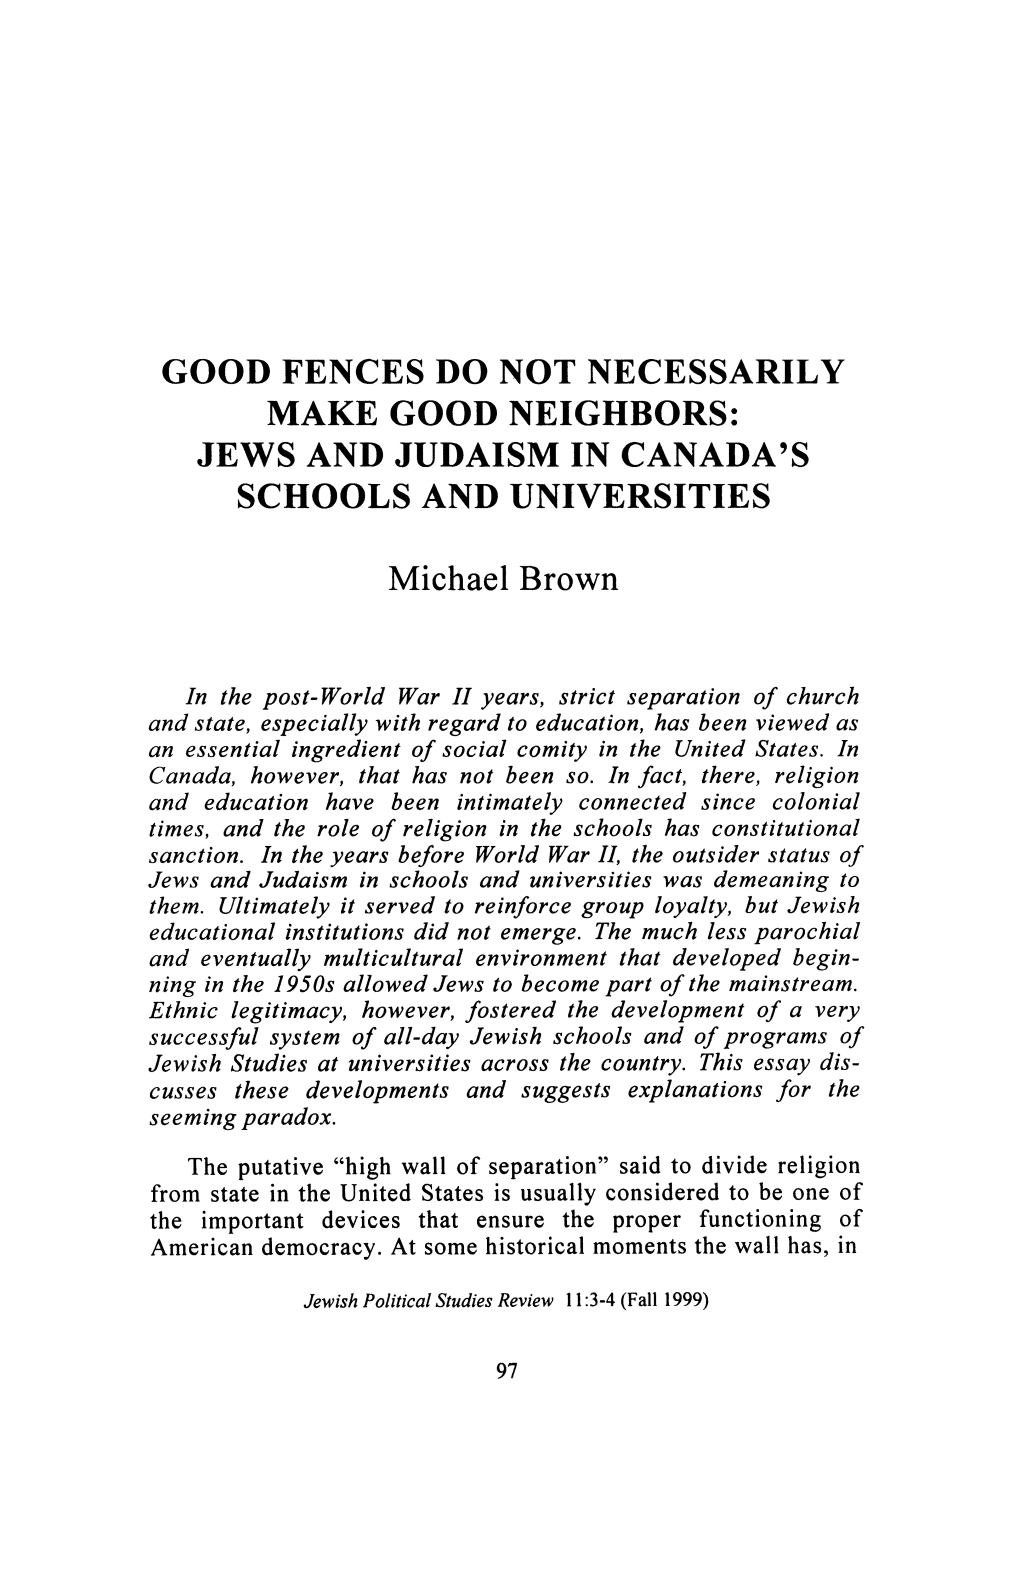 Good Fences Do Not Necessarily Make Good Neighbors: Jews and Judaism in Canada's Schools and Universities